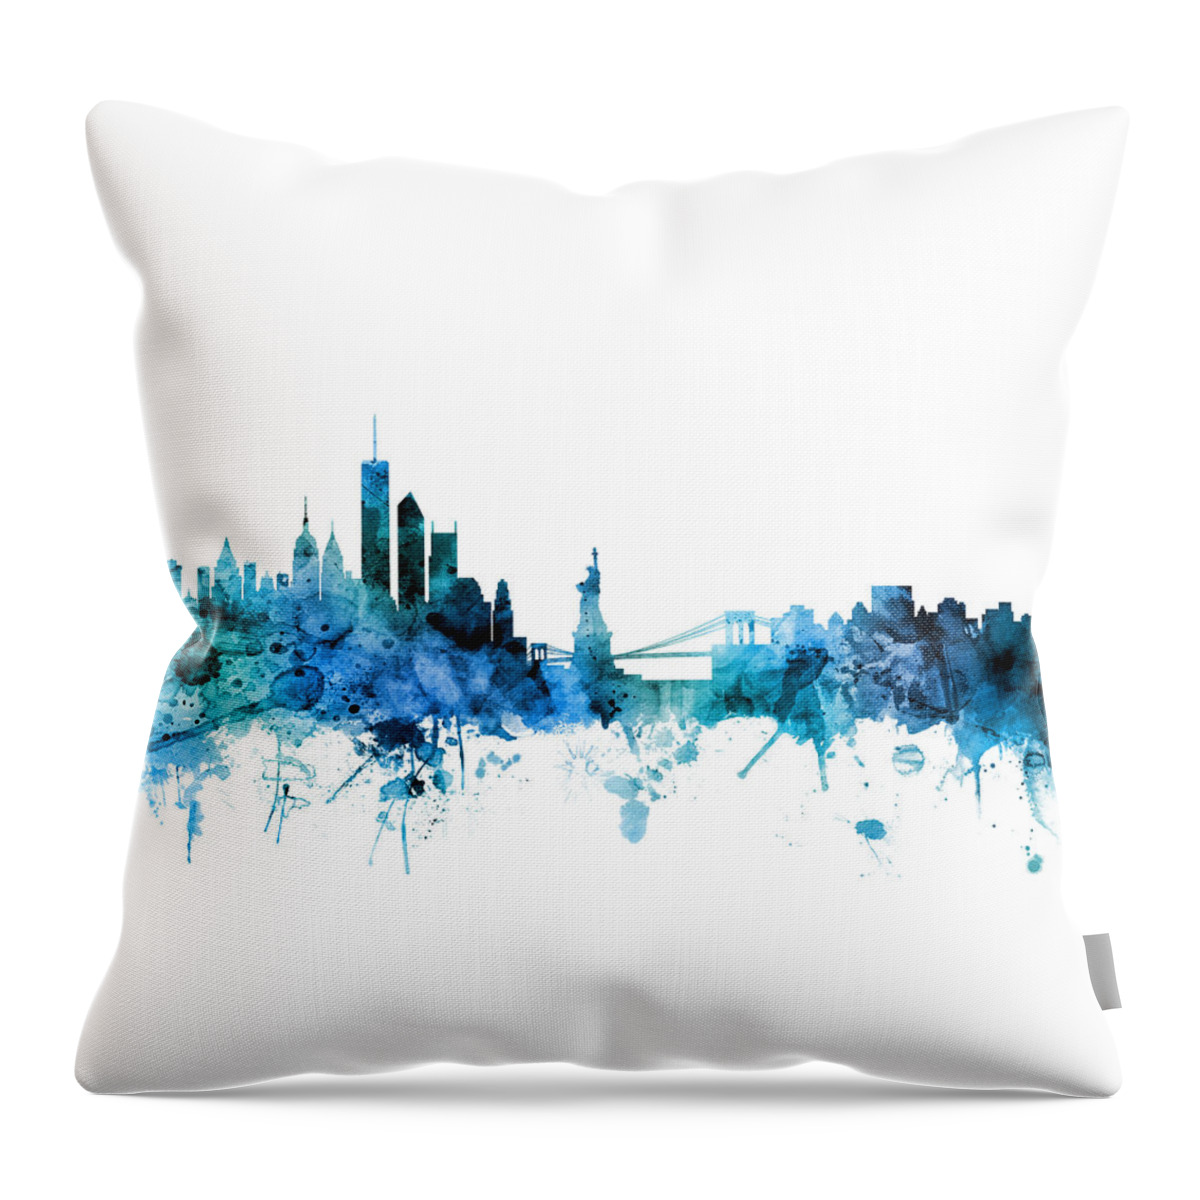 United States Throw Pillow featuring the digital art New York Skyline by Michael Tompsett